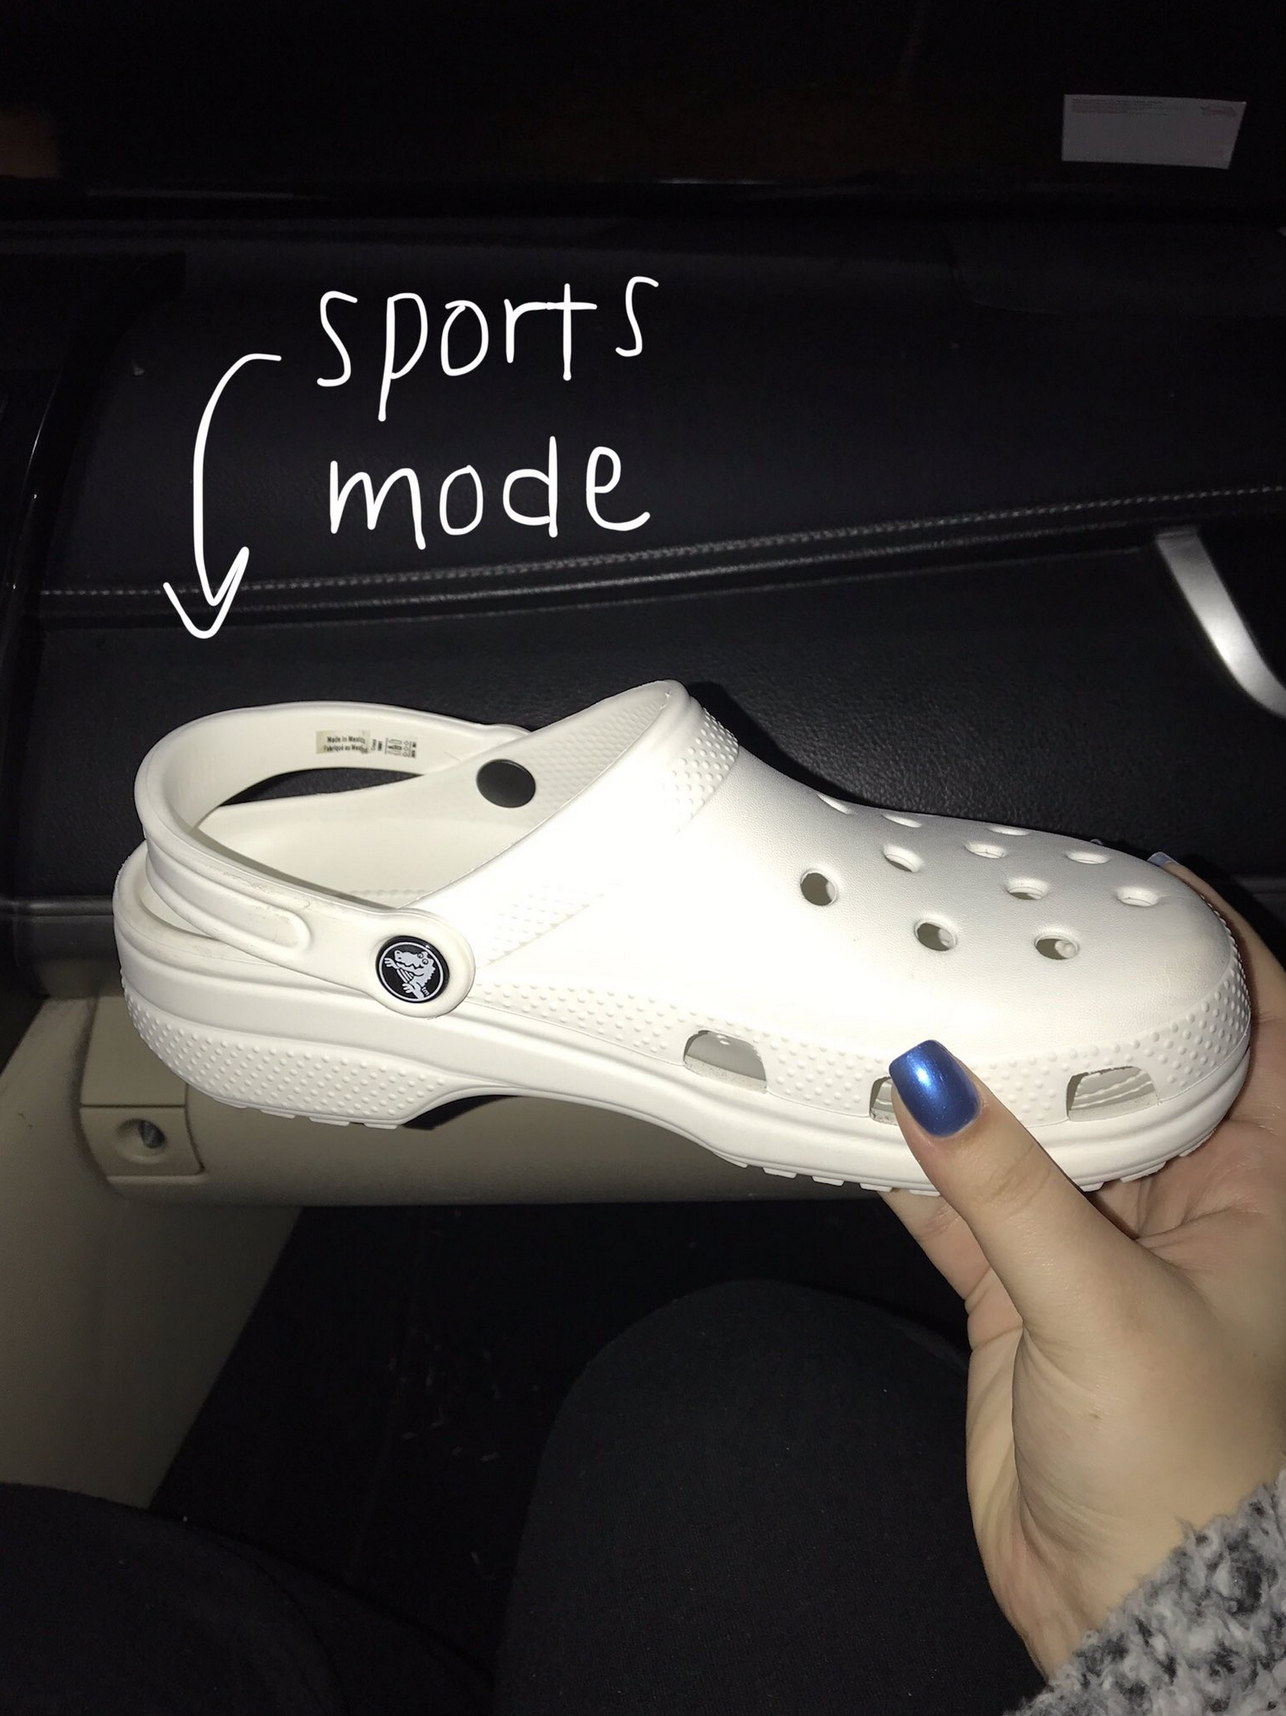 what are the things you put in crocs called